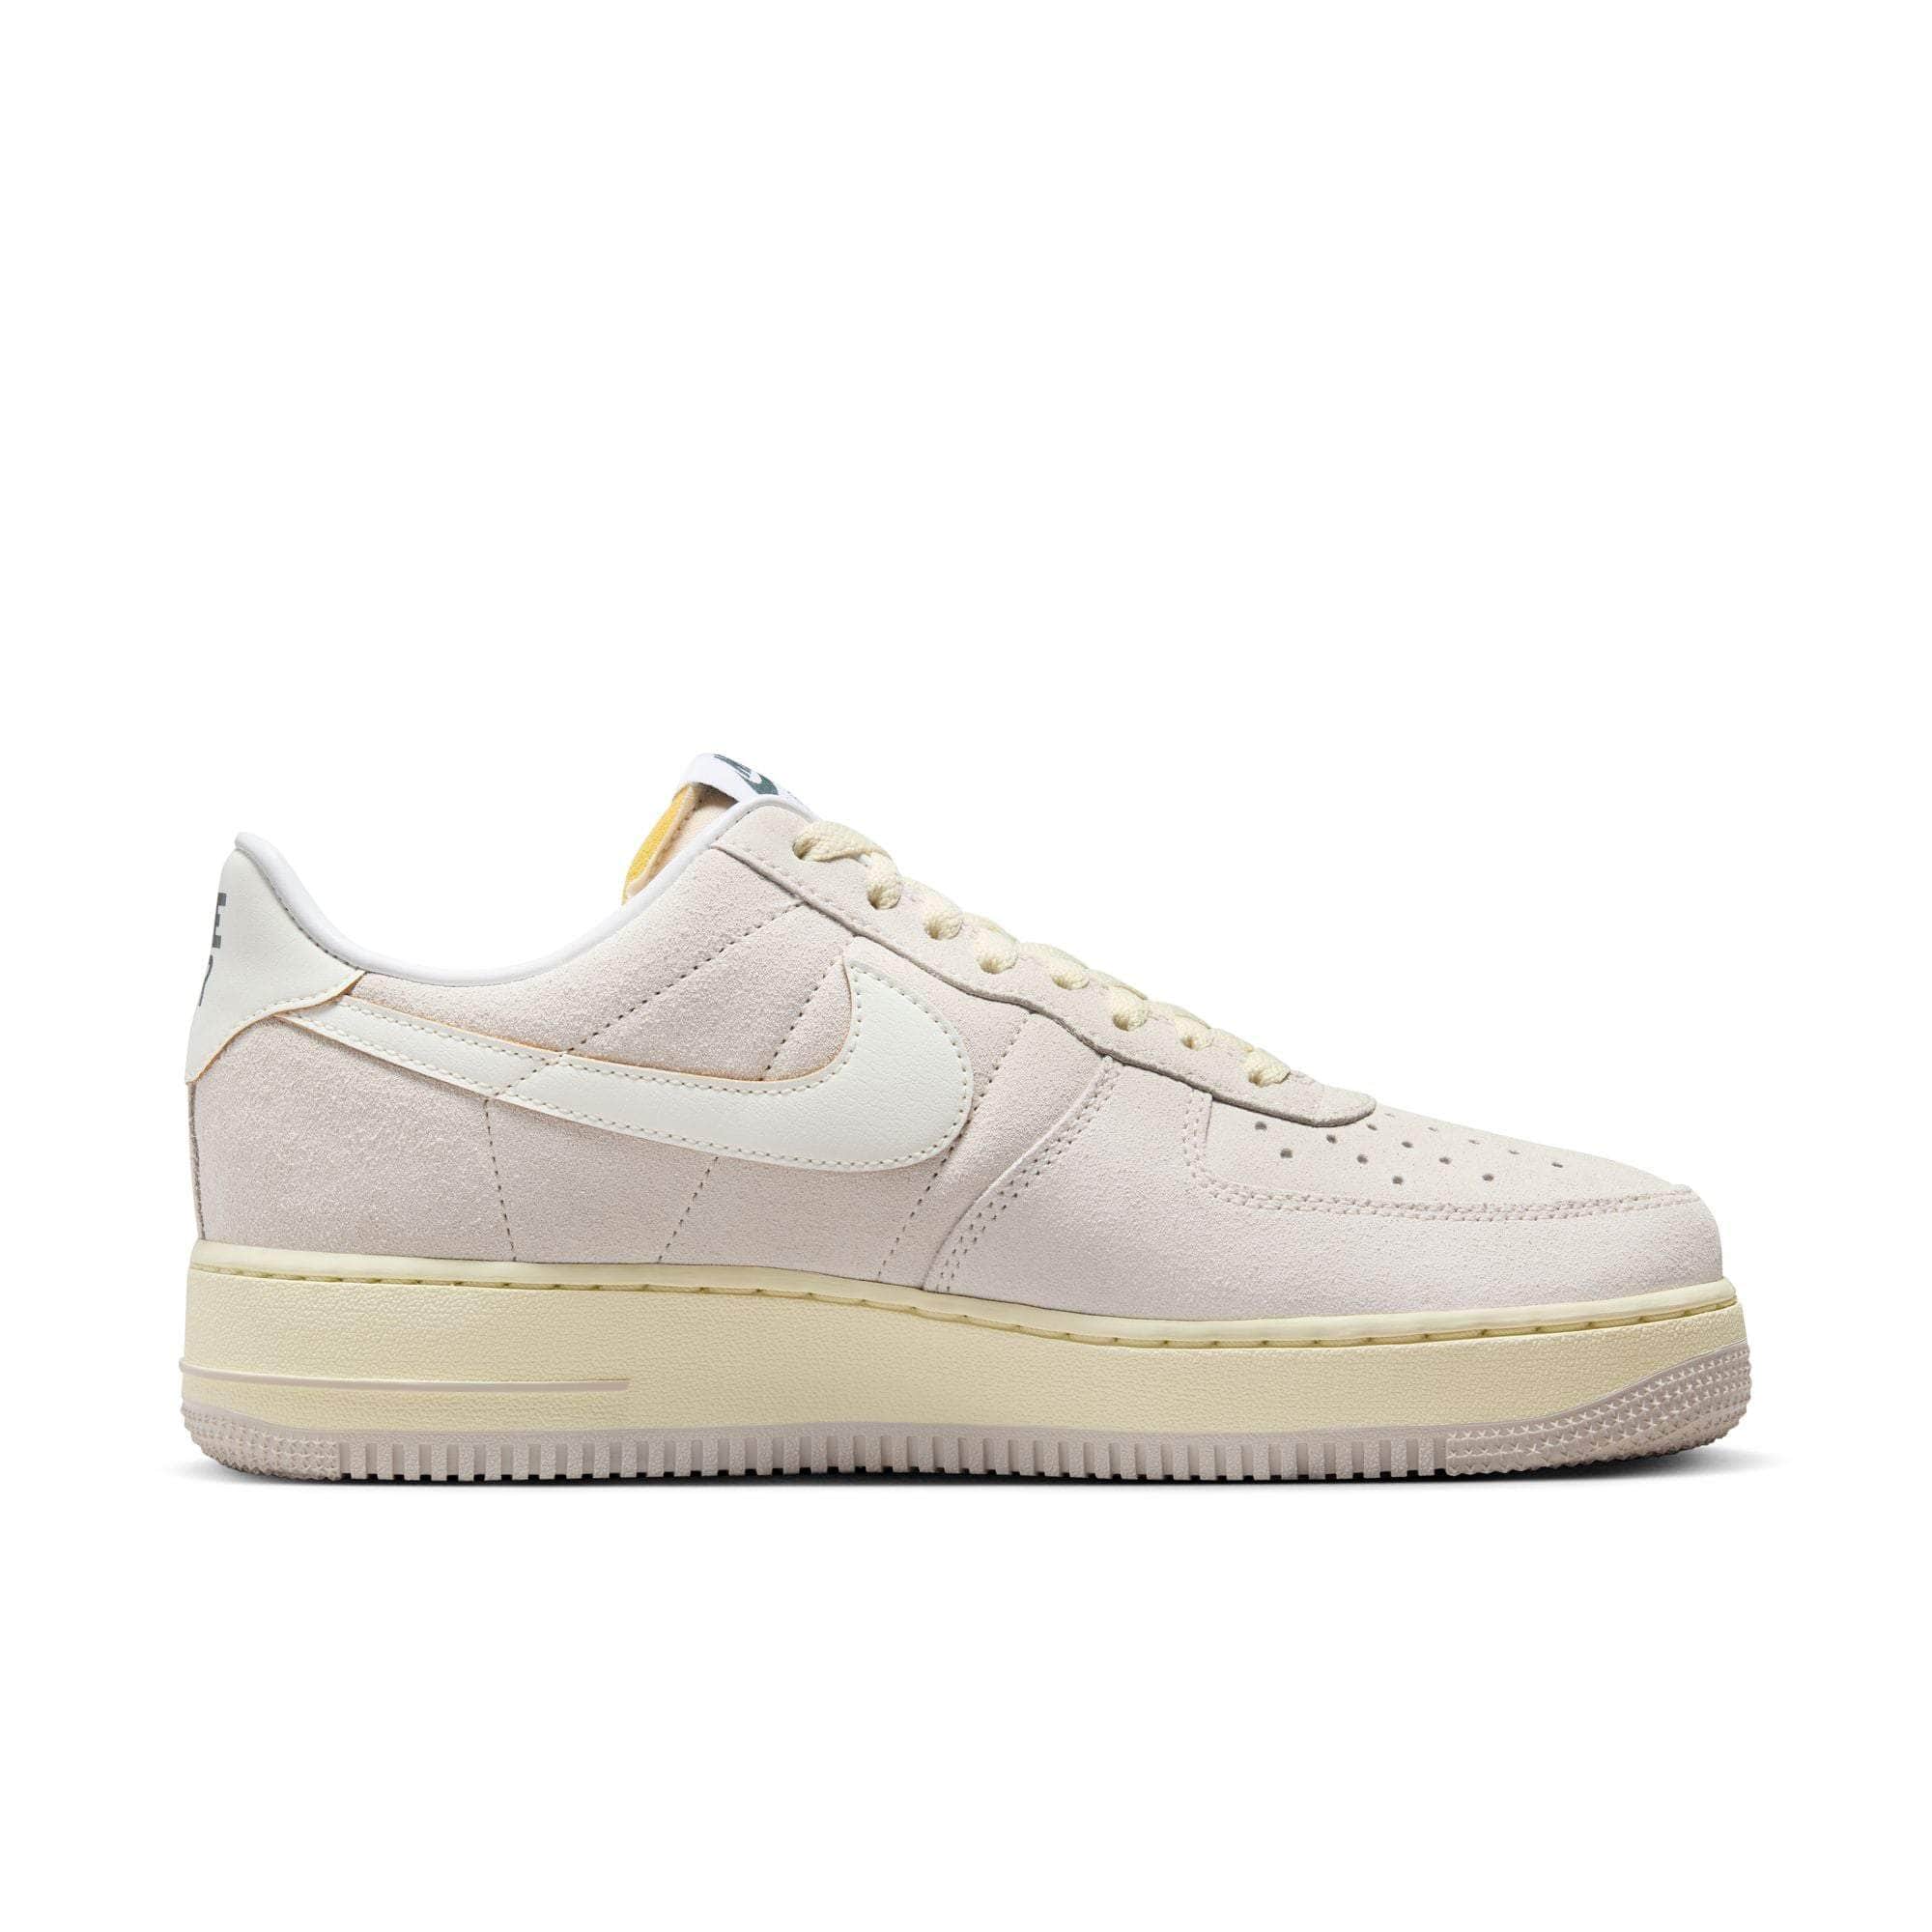 Nike Air Force 1 Low Athletic Department - Size 12 Men